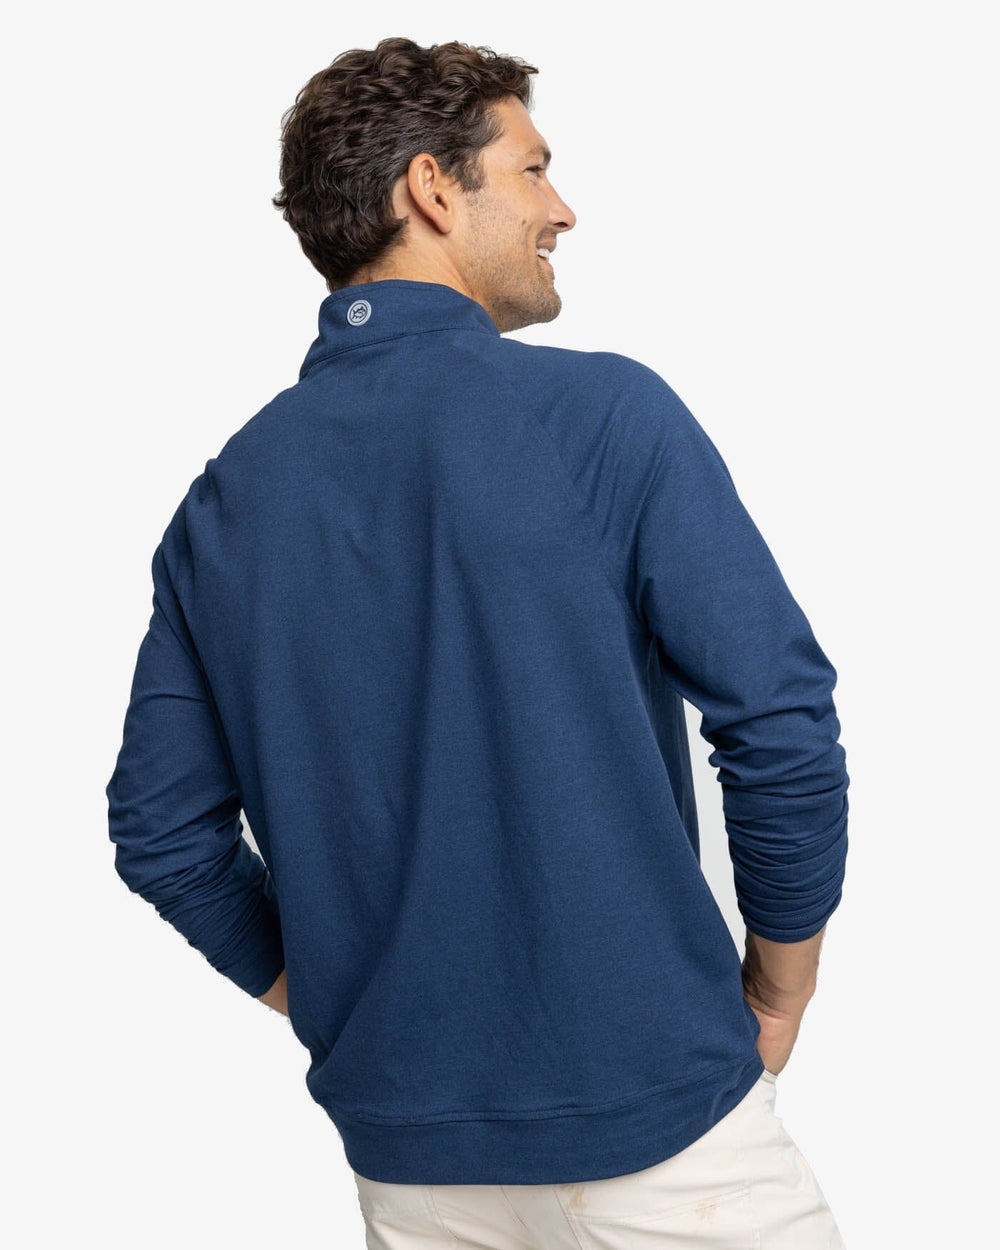 The back view of the Southern Tide Cruiser Heather Quarter Zip Pullover by Southern Tide - Heather Dress Blue